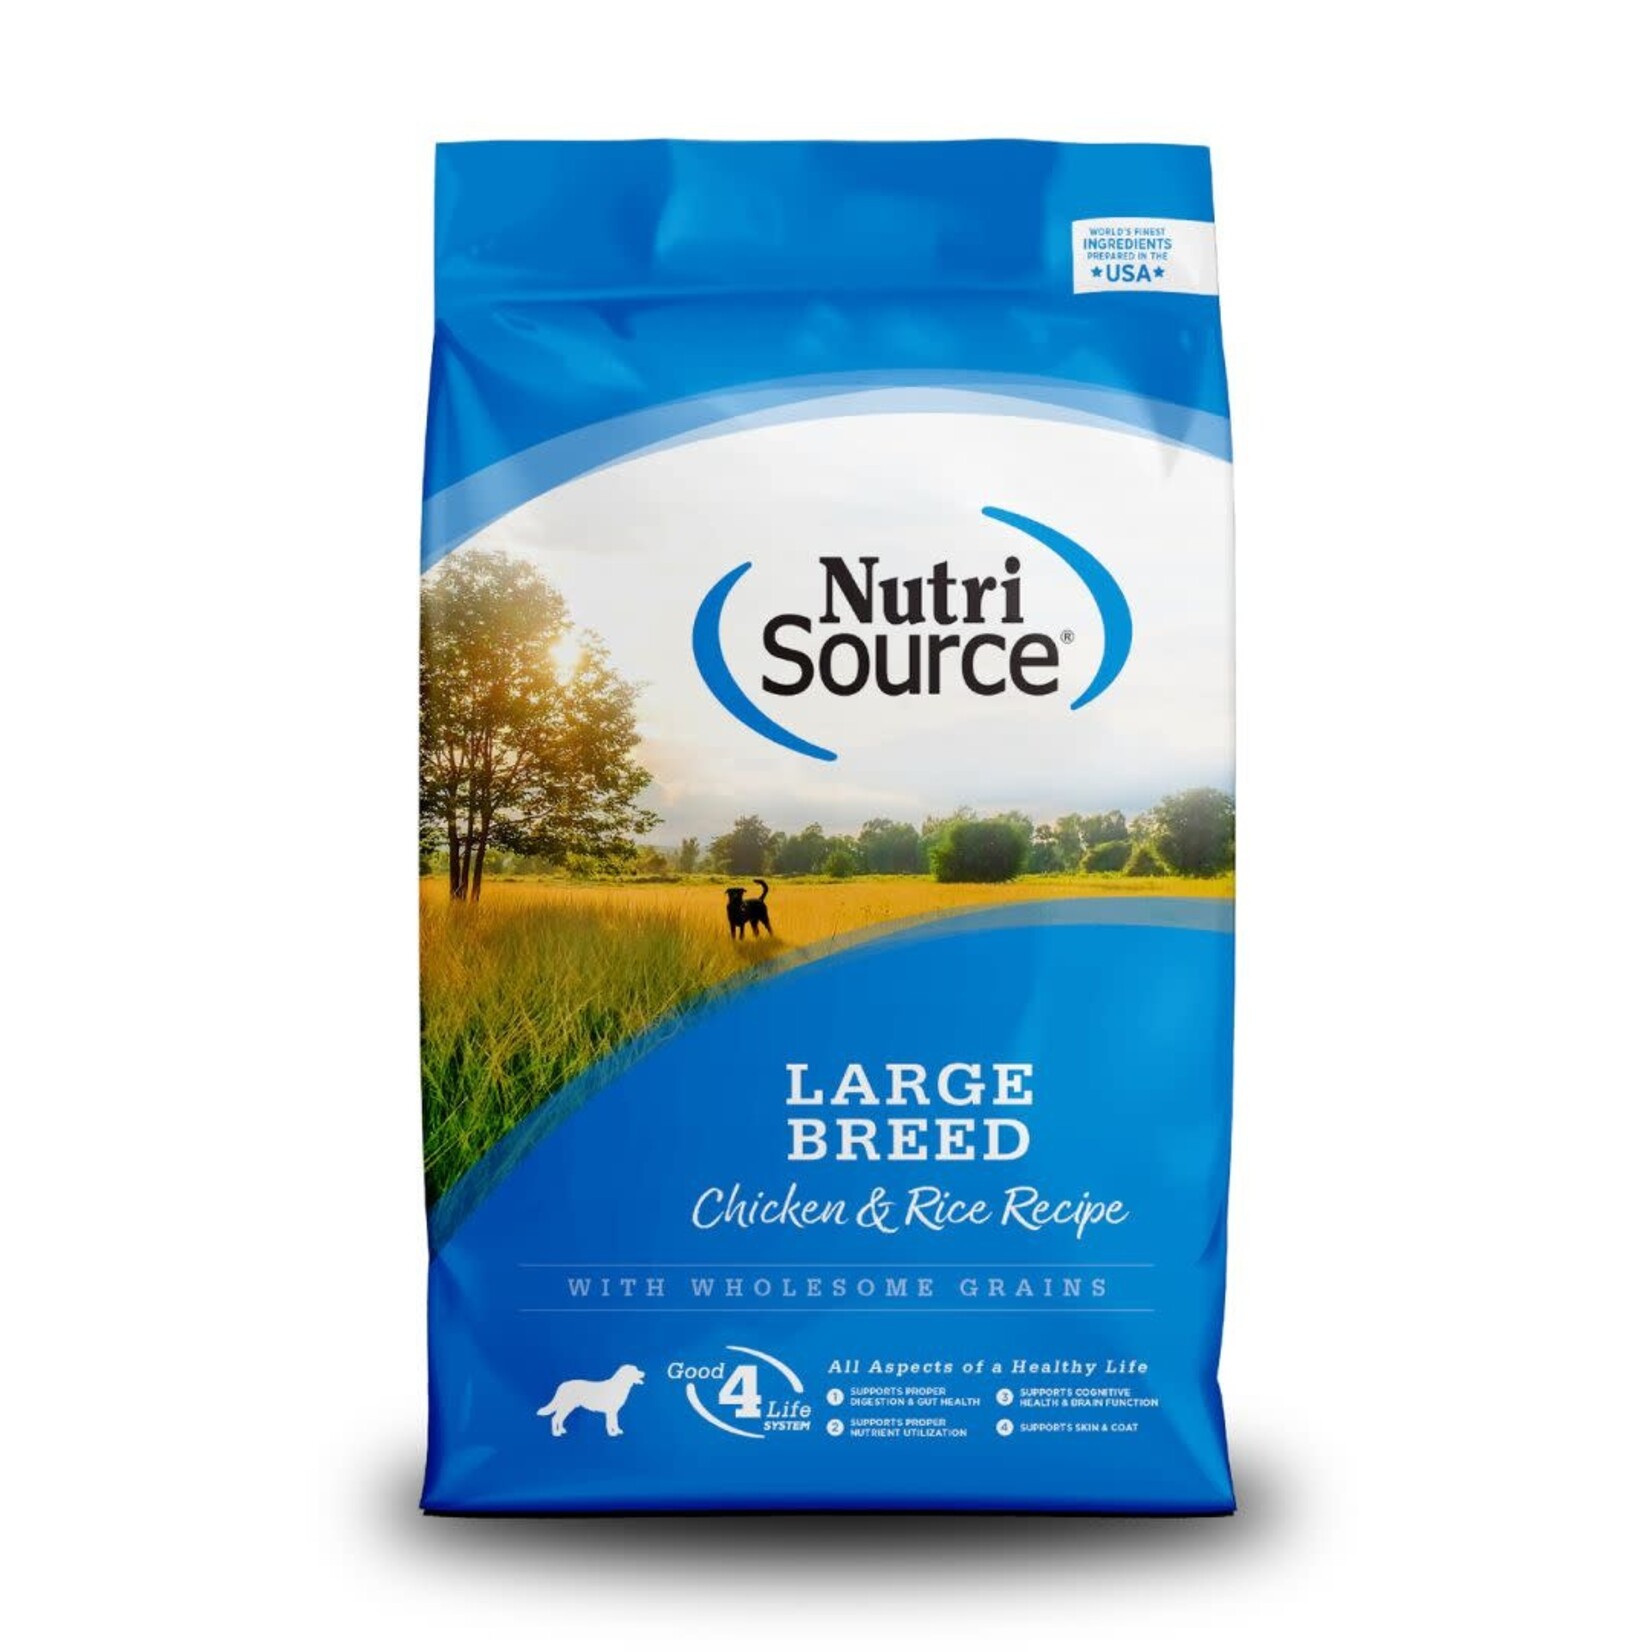 NutriSource NutriSource Large Breed Chicken & Rice Recipe 26 lb